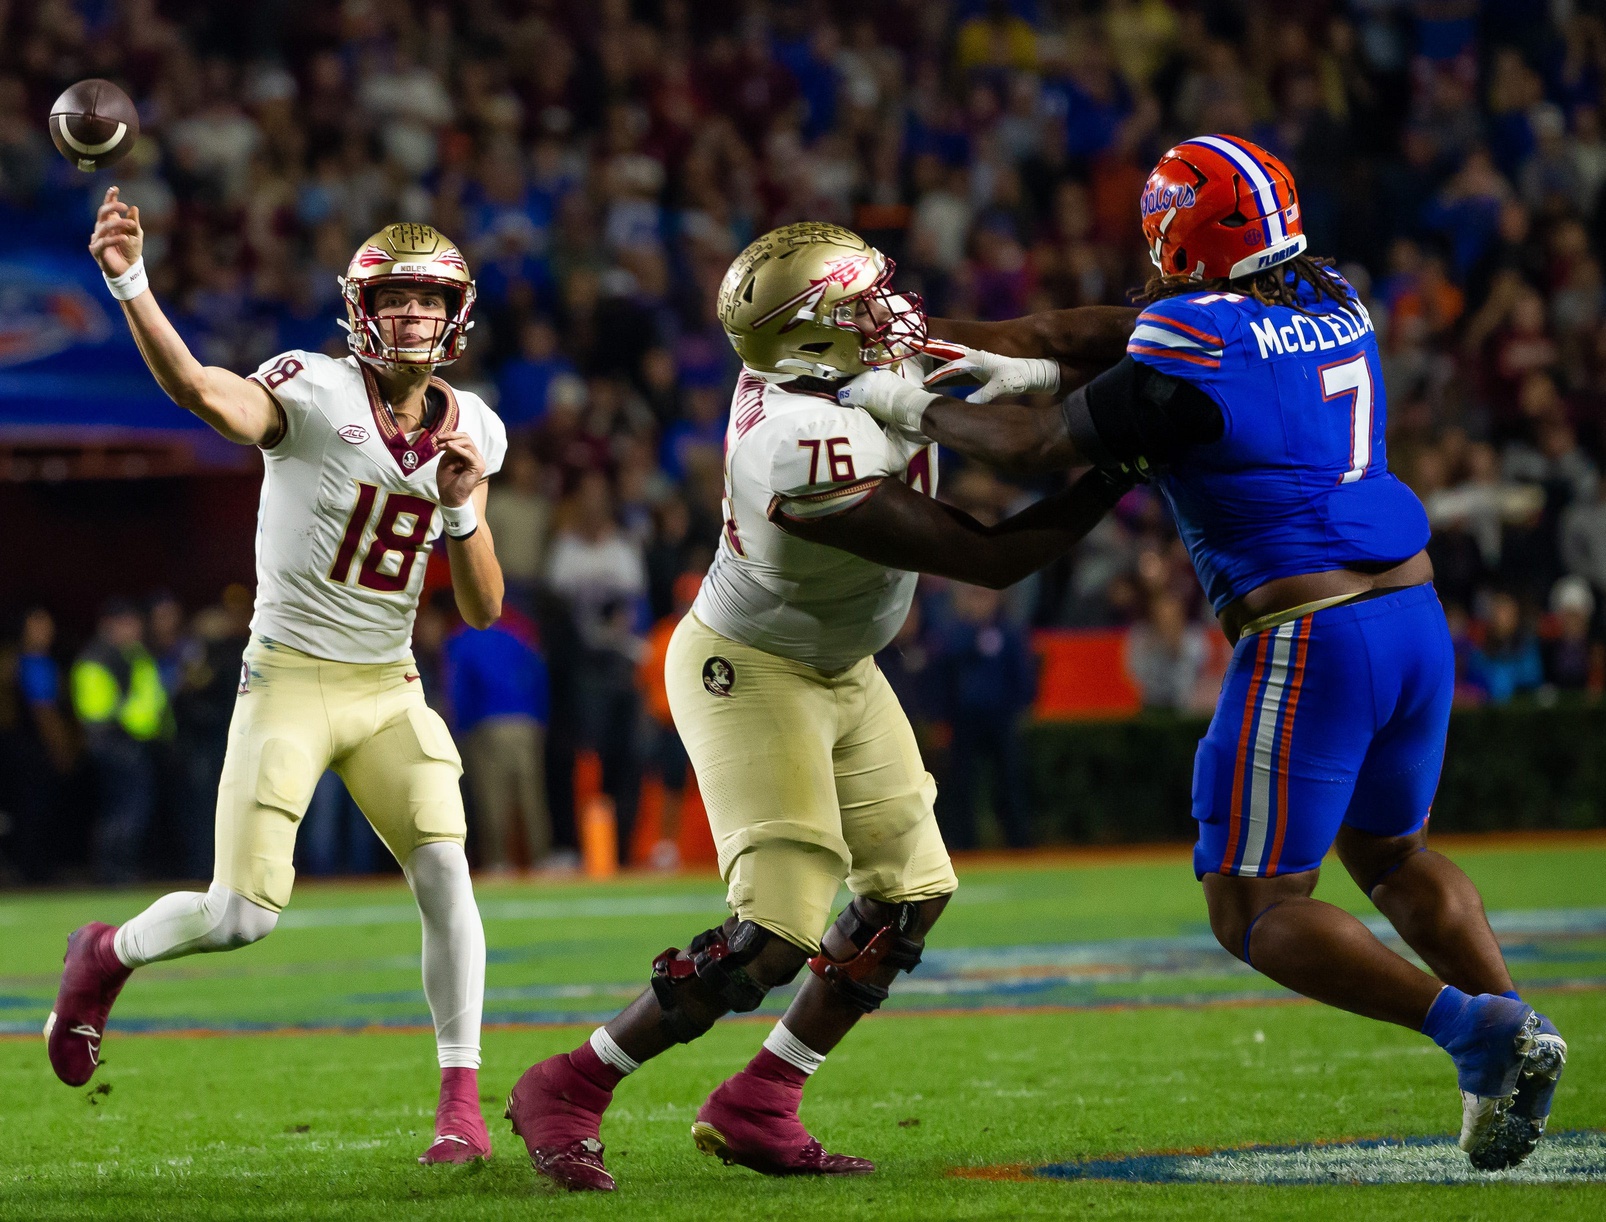 Florida State Stays in playoff hunt